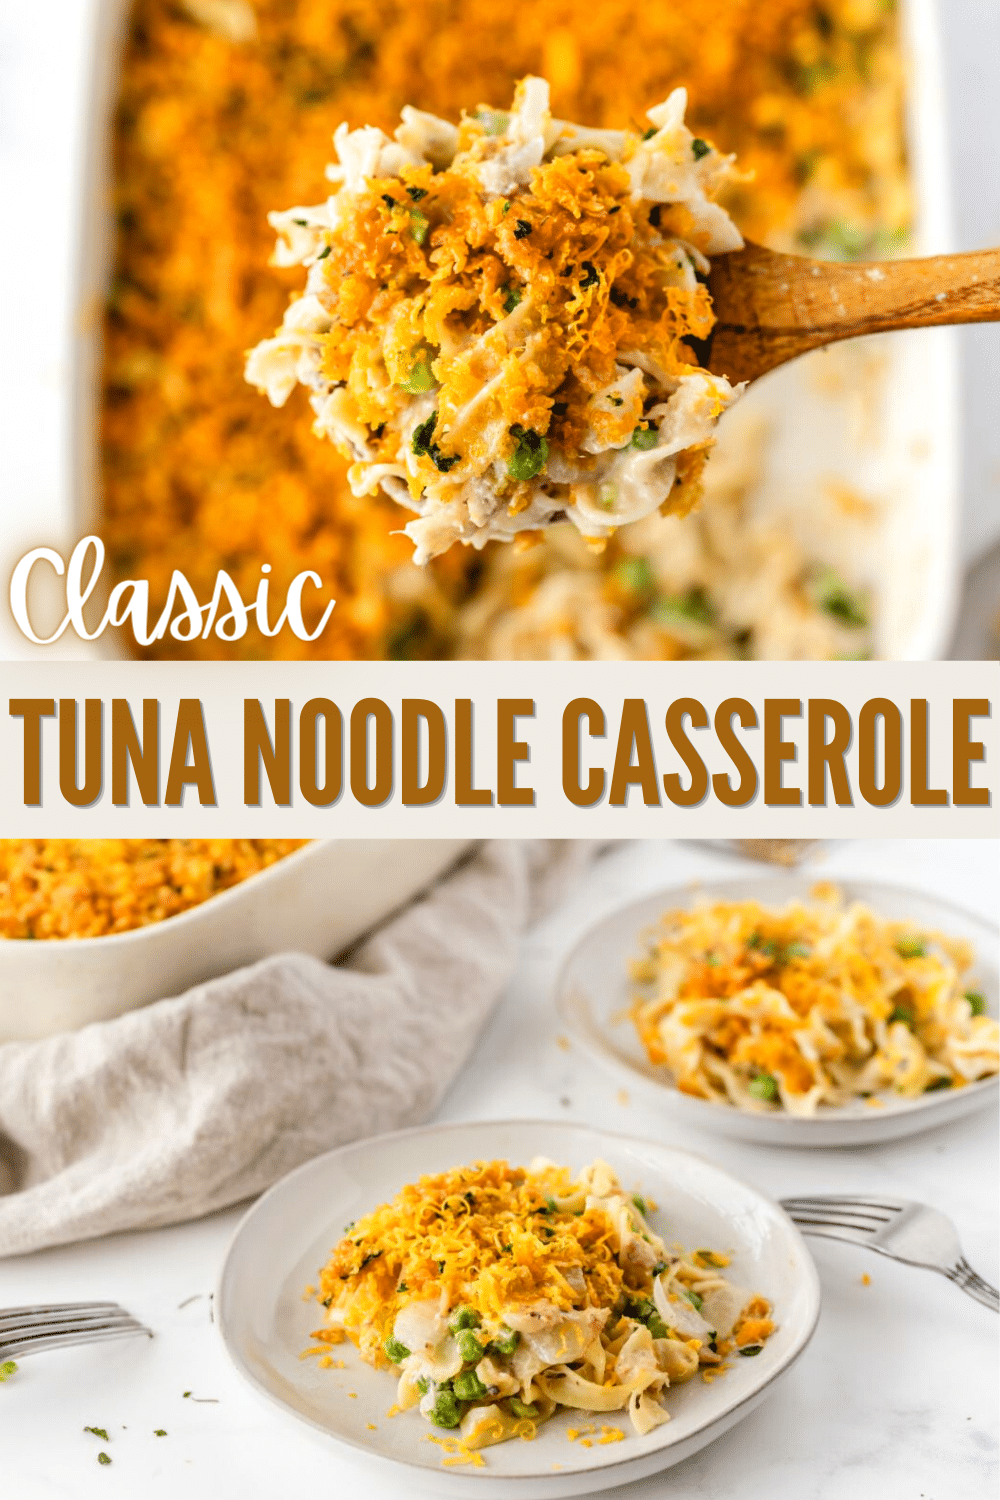 A collage of 2 images of Classic Tuna Noodle Casserole. Top part shows a ladle with a tuna noodle in it, bottom part shows a serving on white plate.